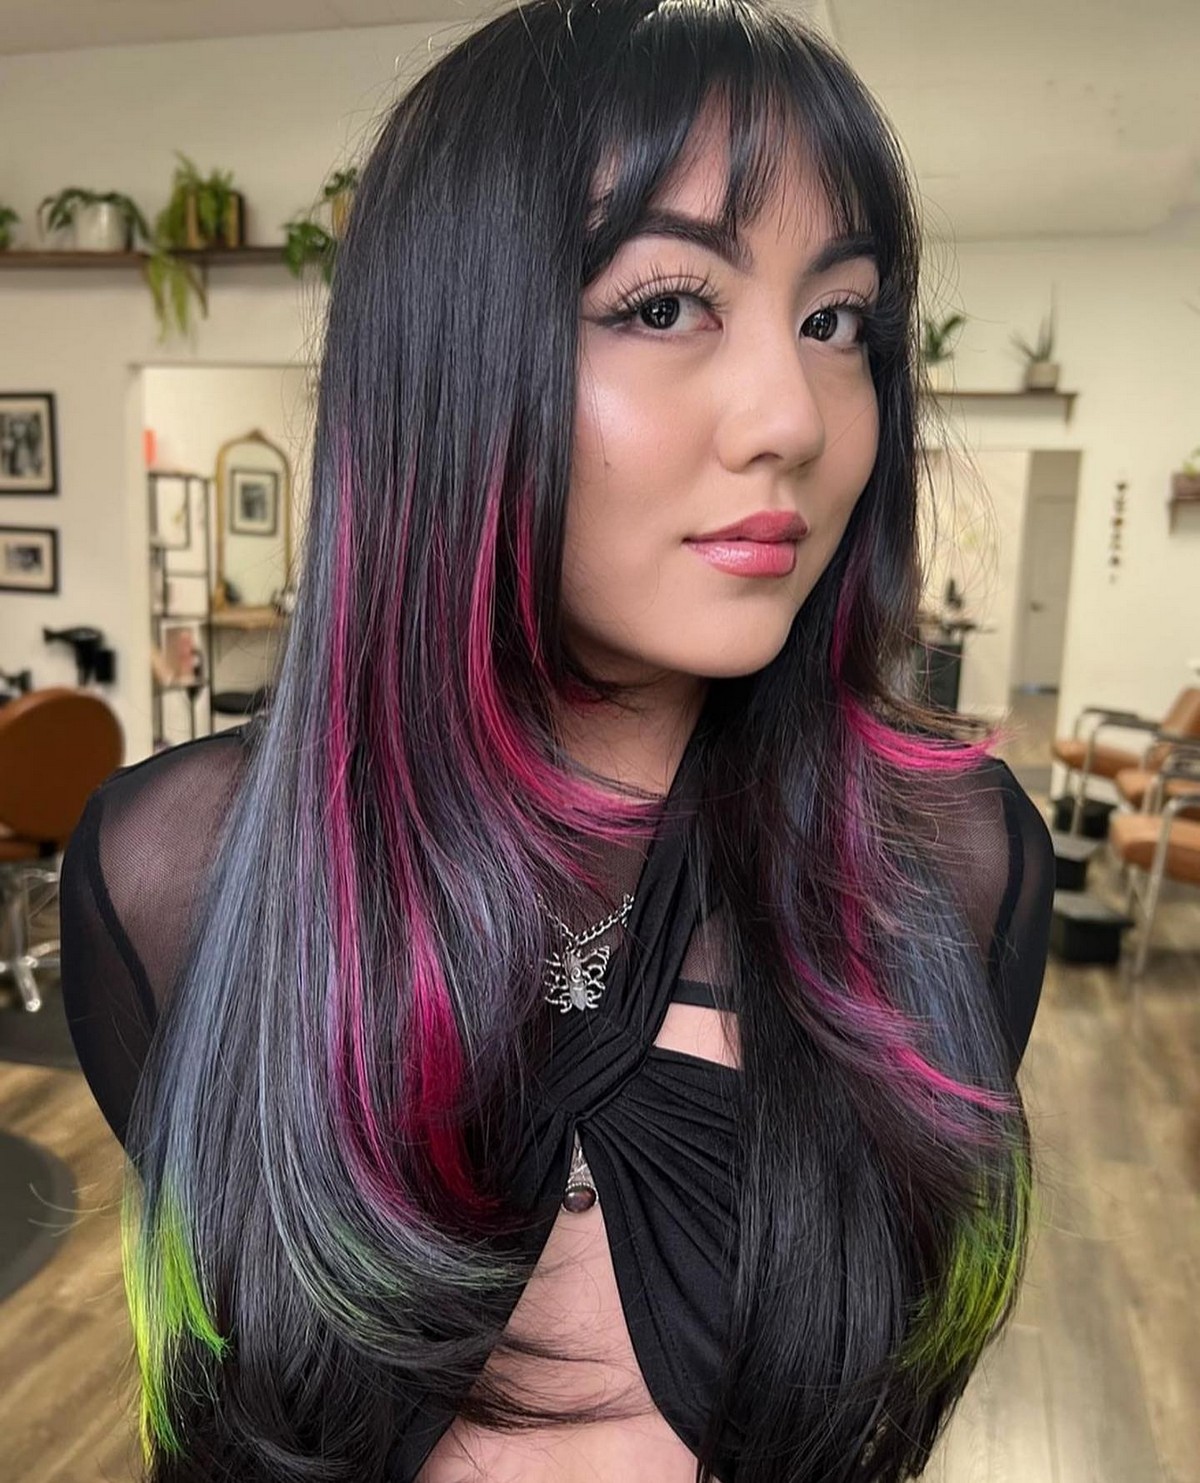 Black Layered Hair With Colored Highlights And Wispy Bangs